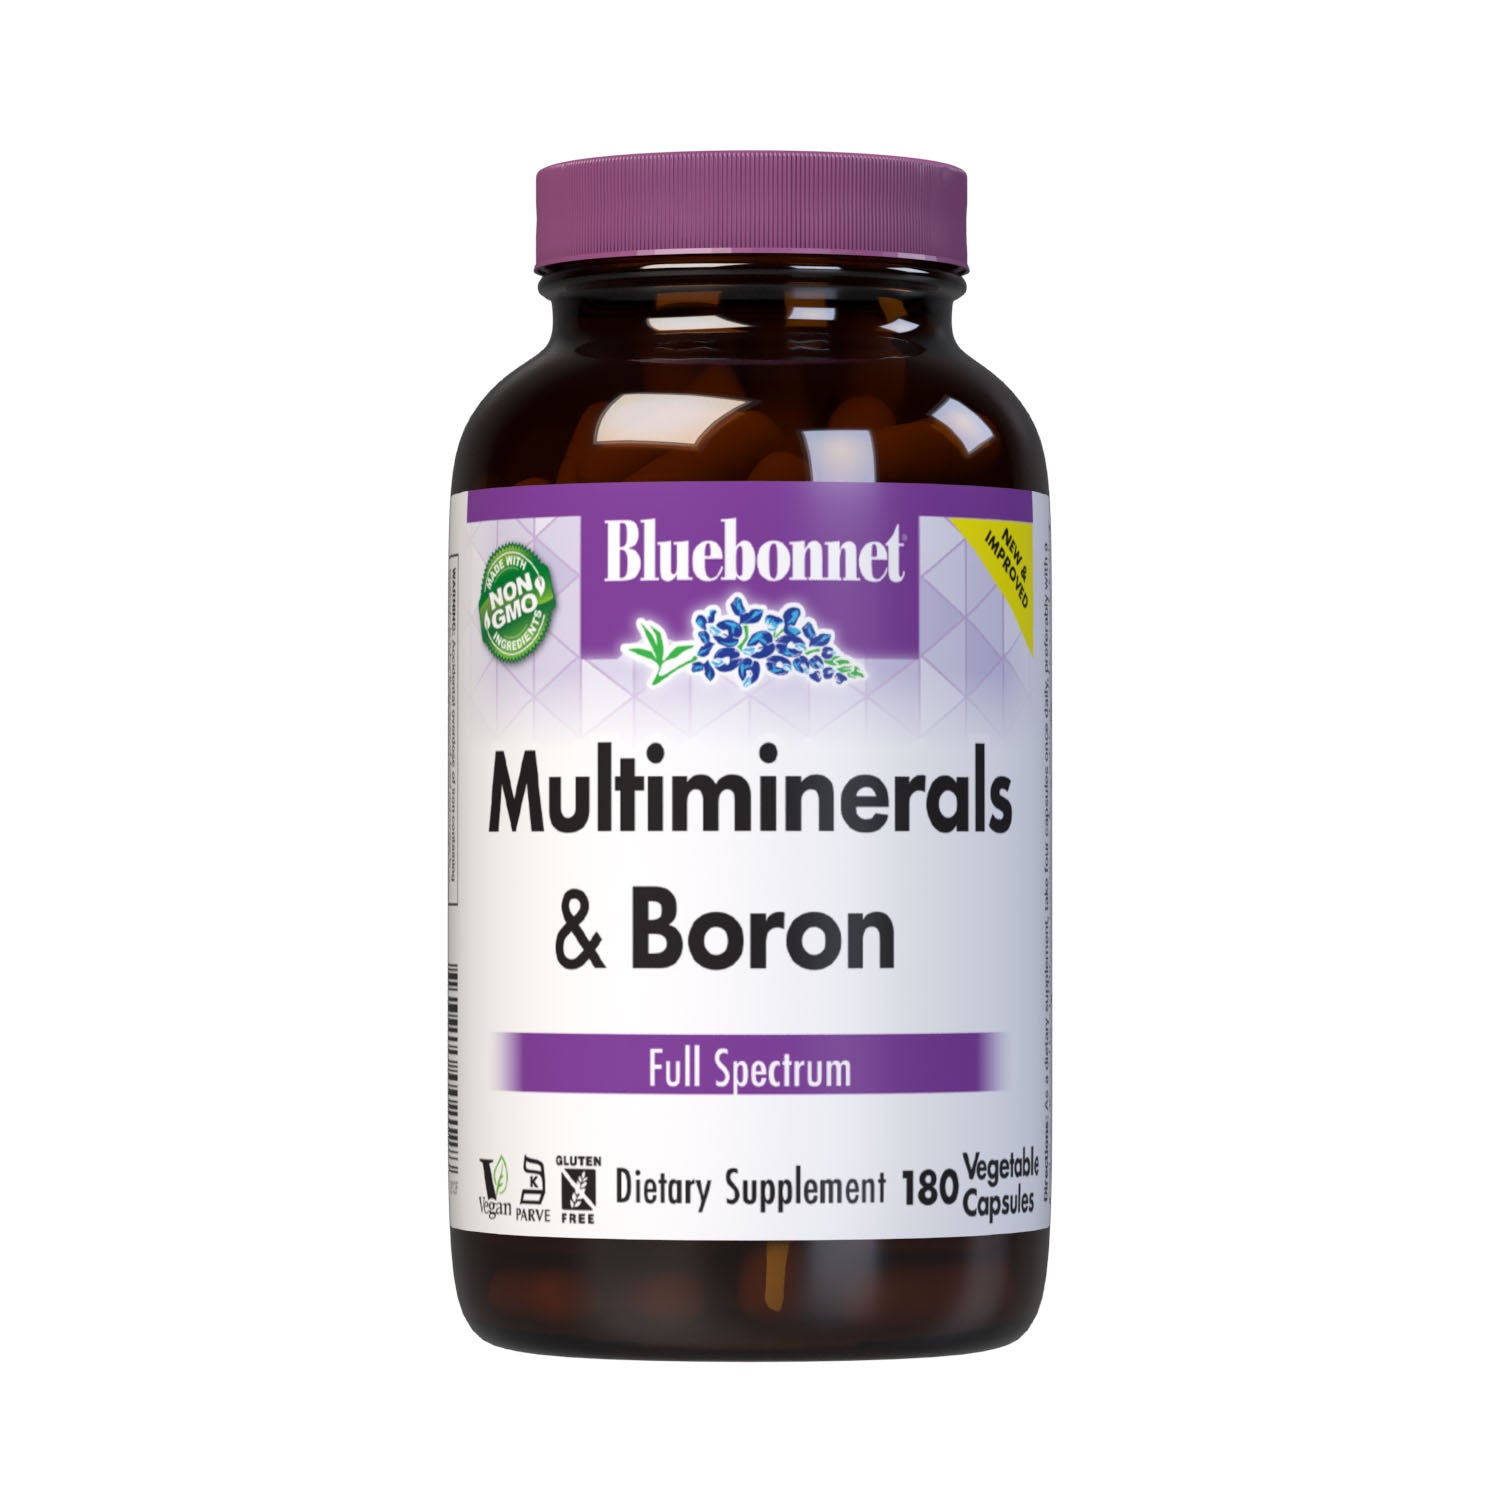 Multiminerals and Boron 180 vegetable capsules (with iron). Full spectrum dietary supplement. #size_180 count